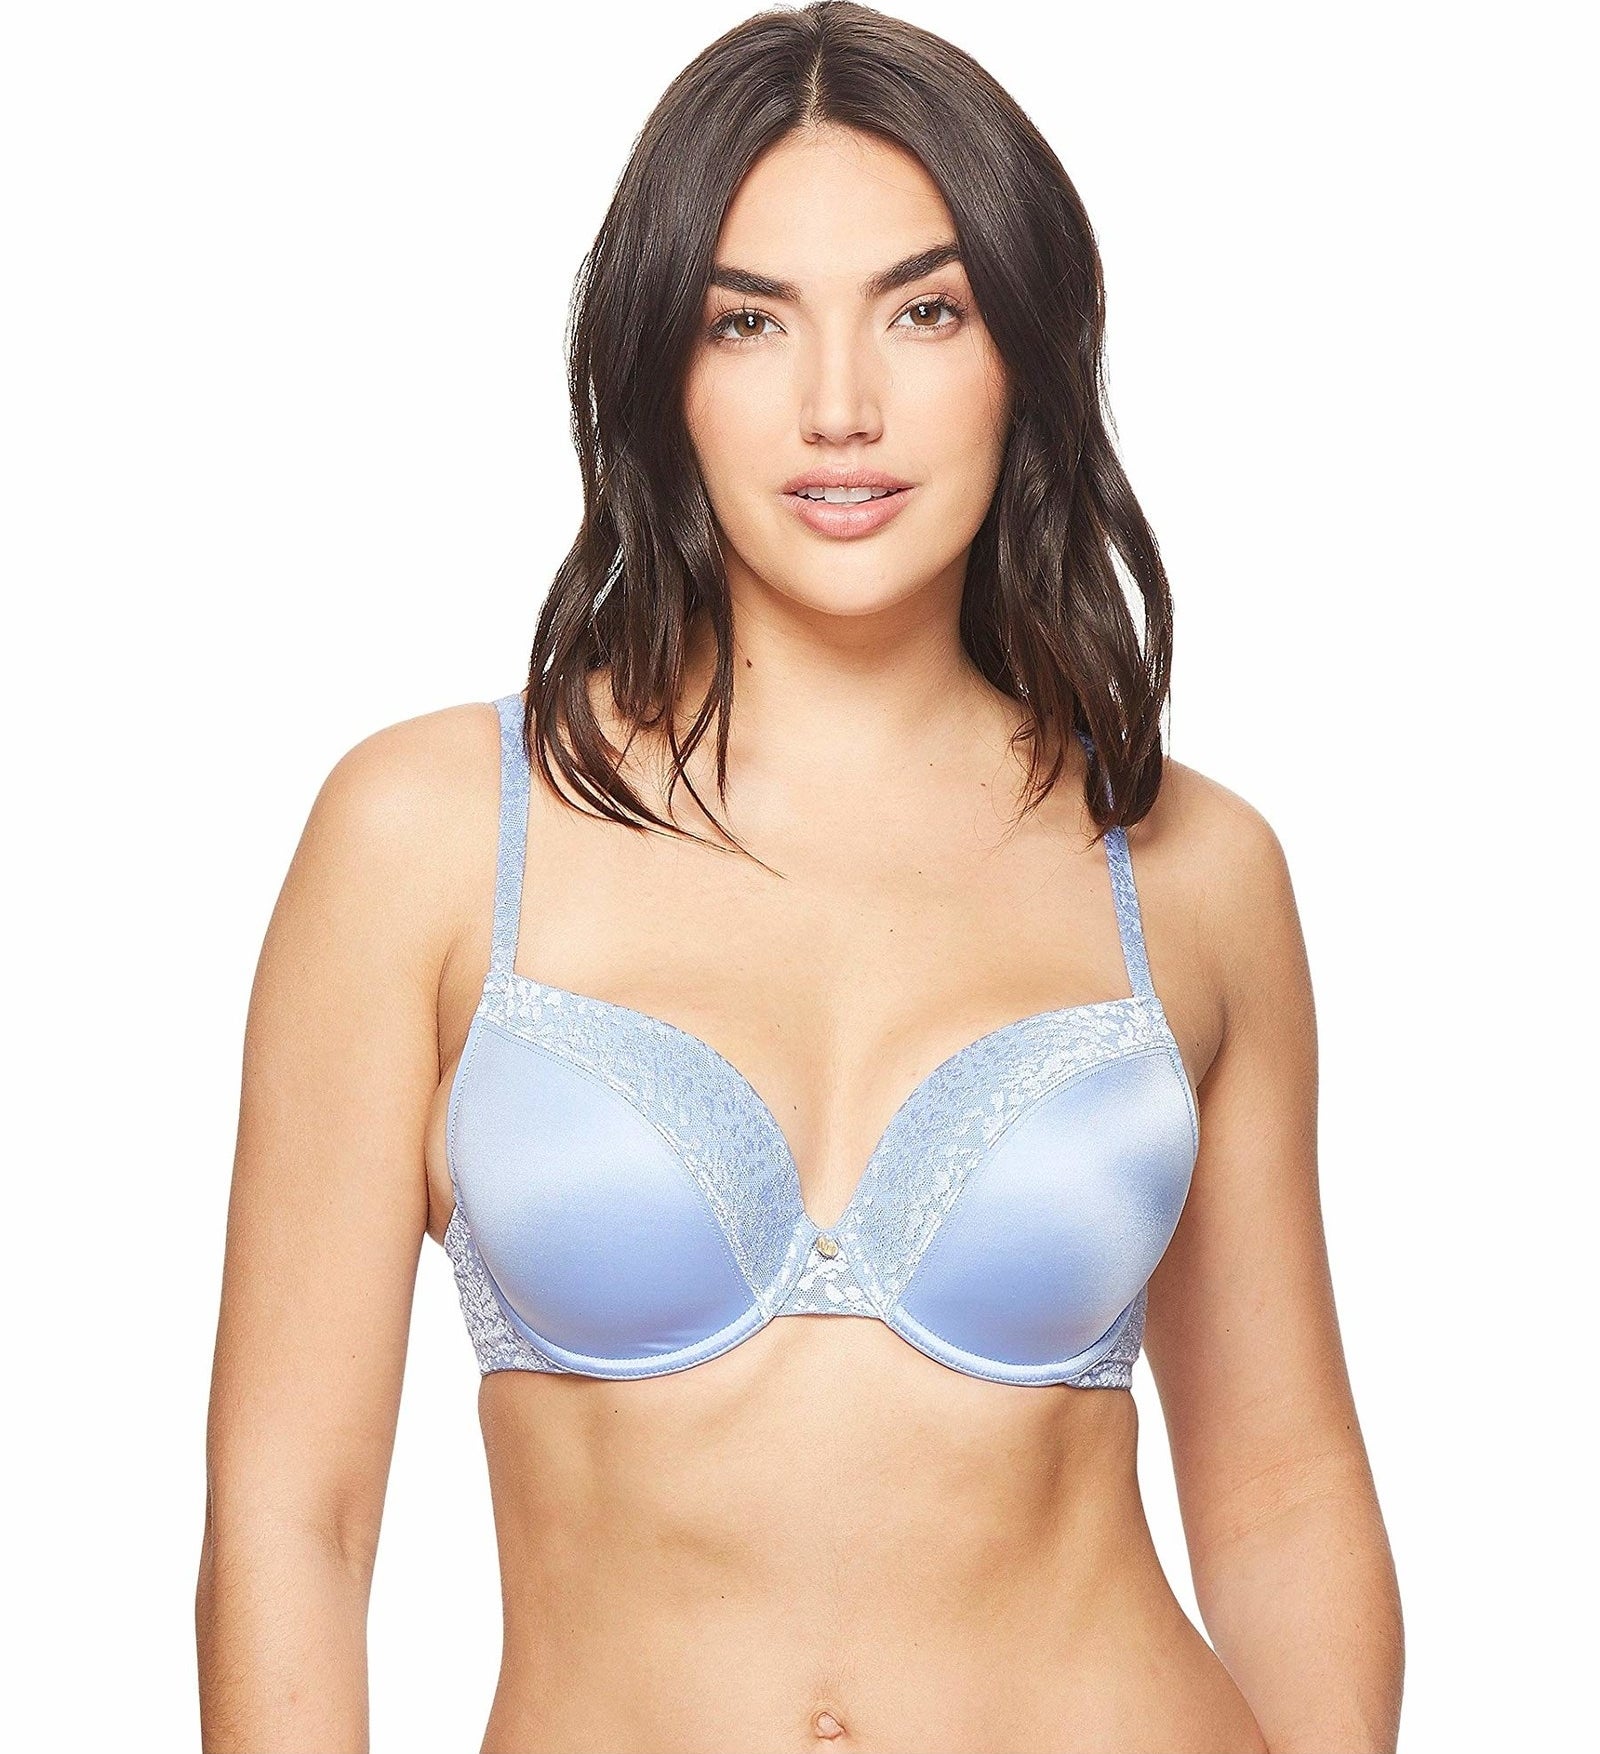 This $28 Bra Is So Comfortable, Shoppers 'Hardly Notice' They're